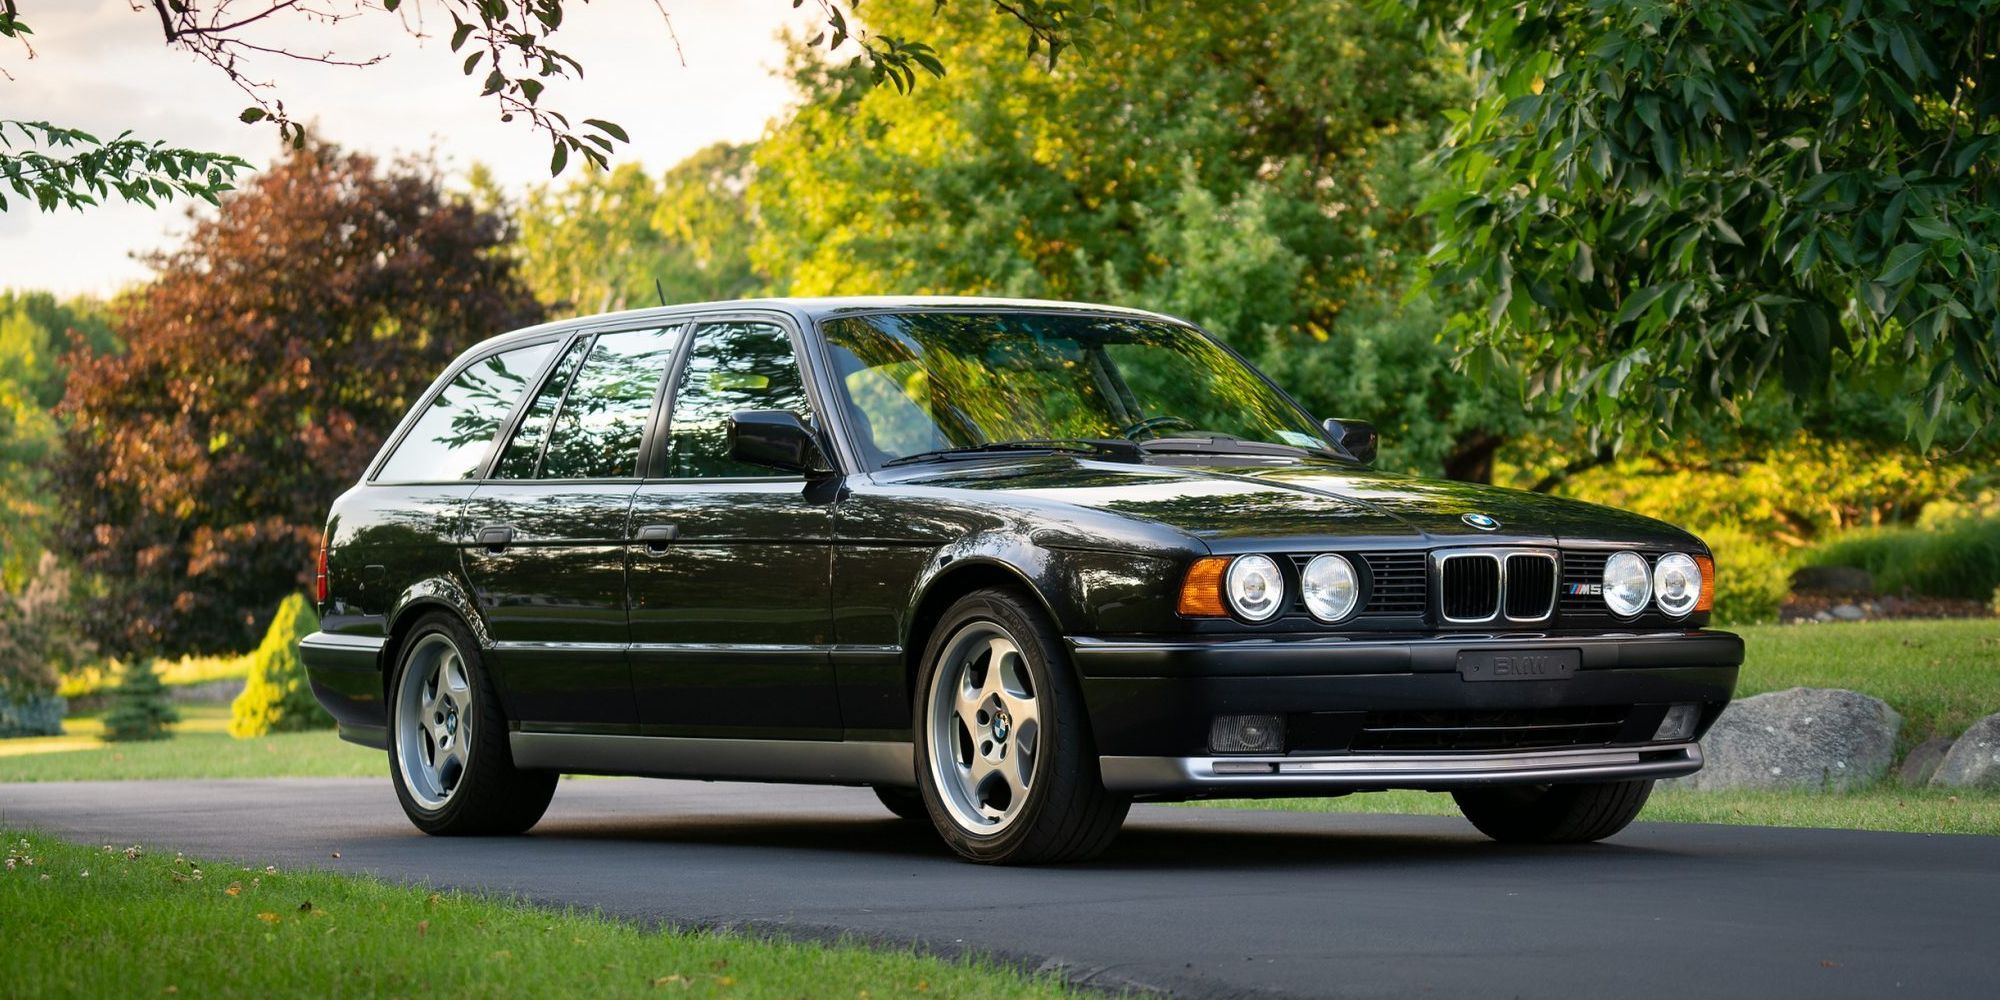 The front of the E34 M5 Touring